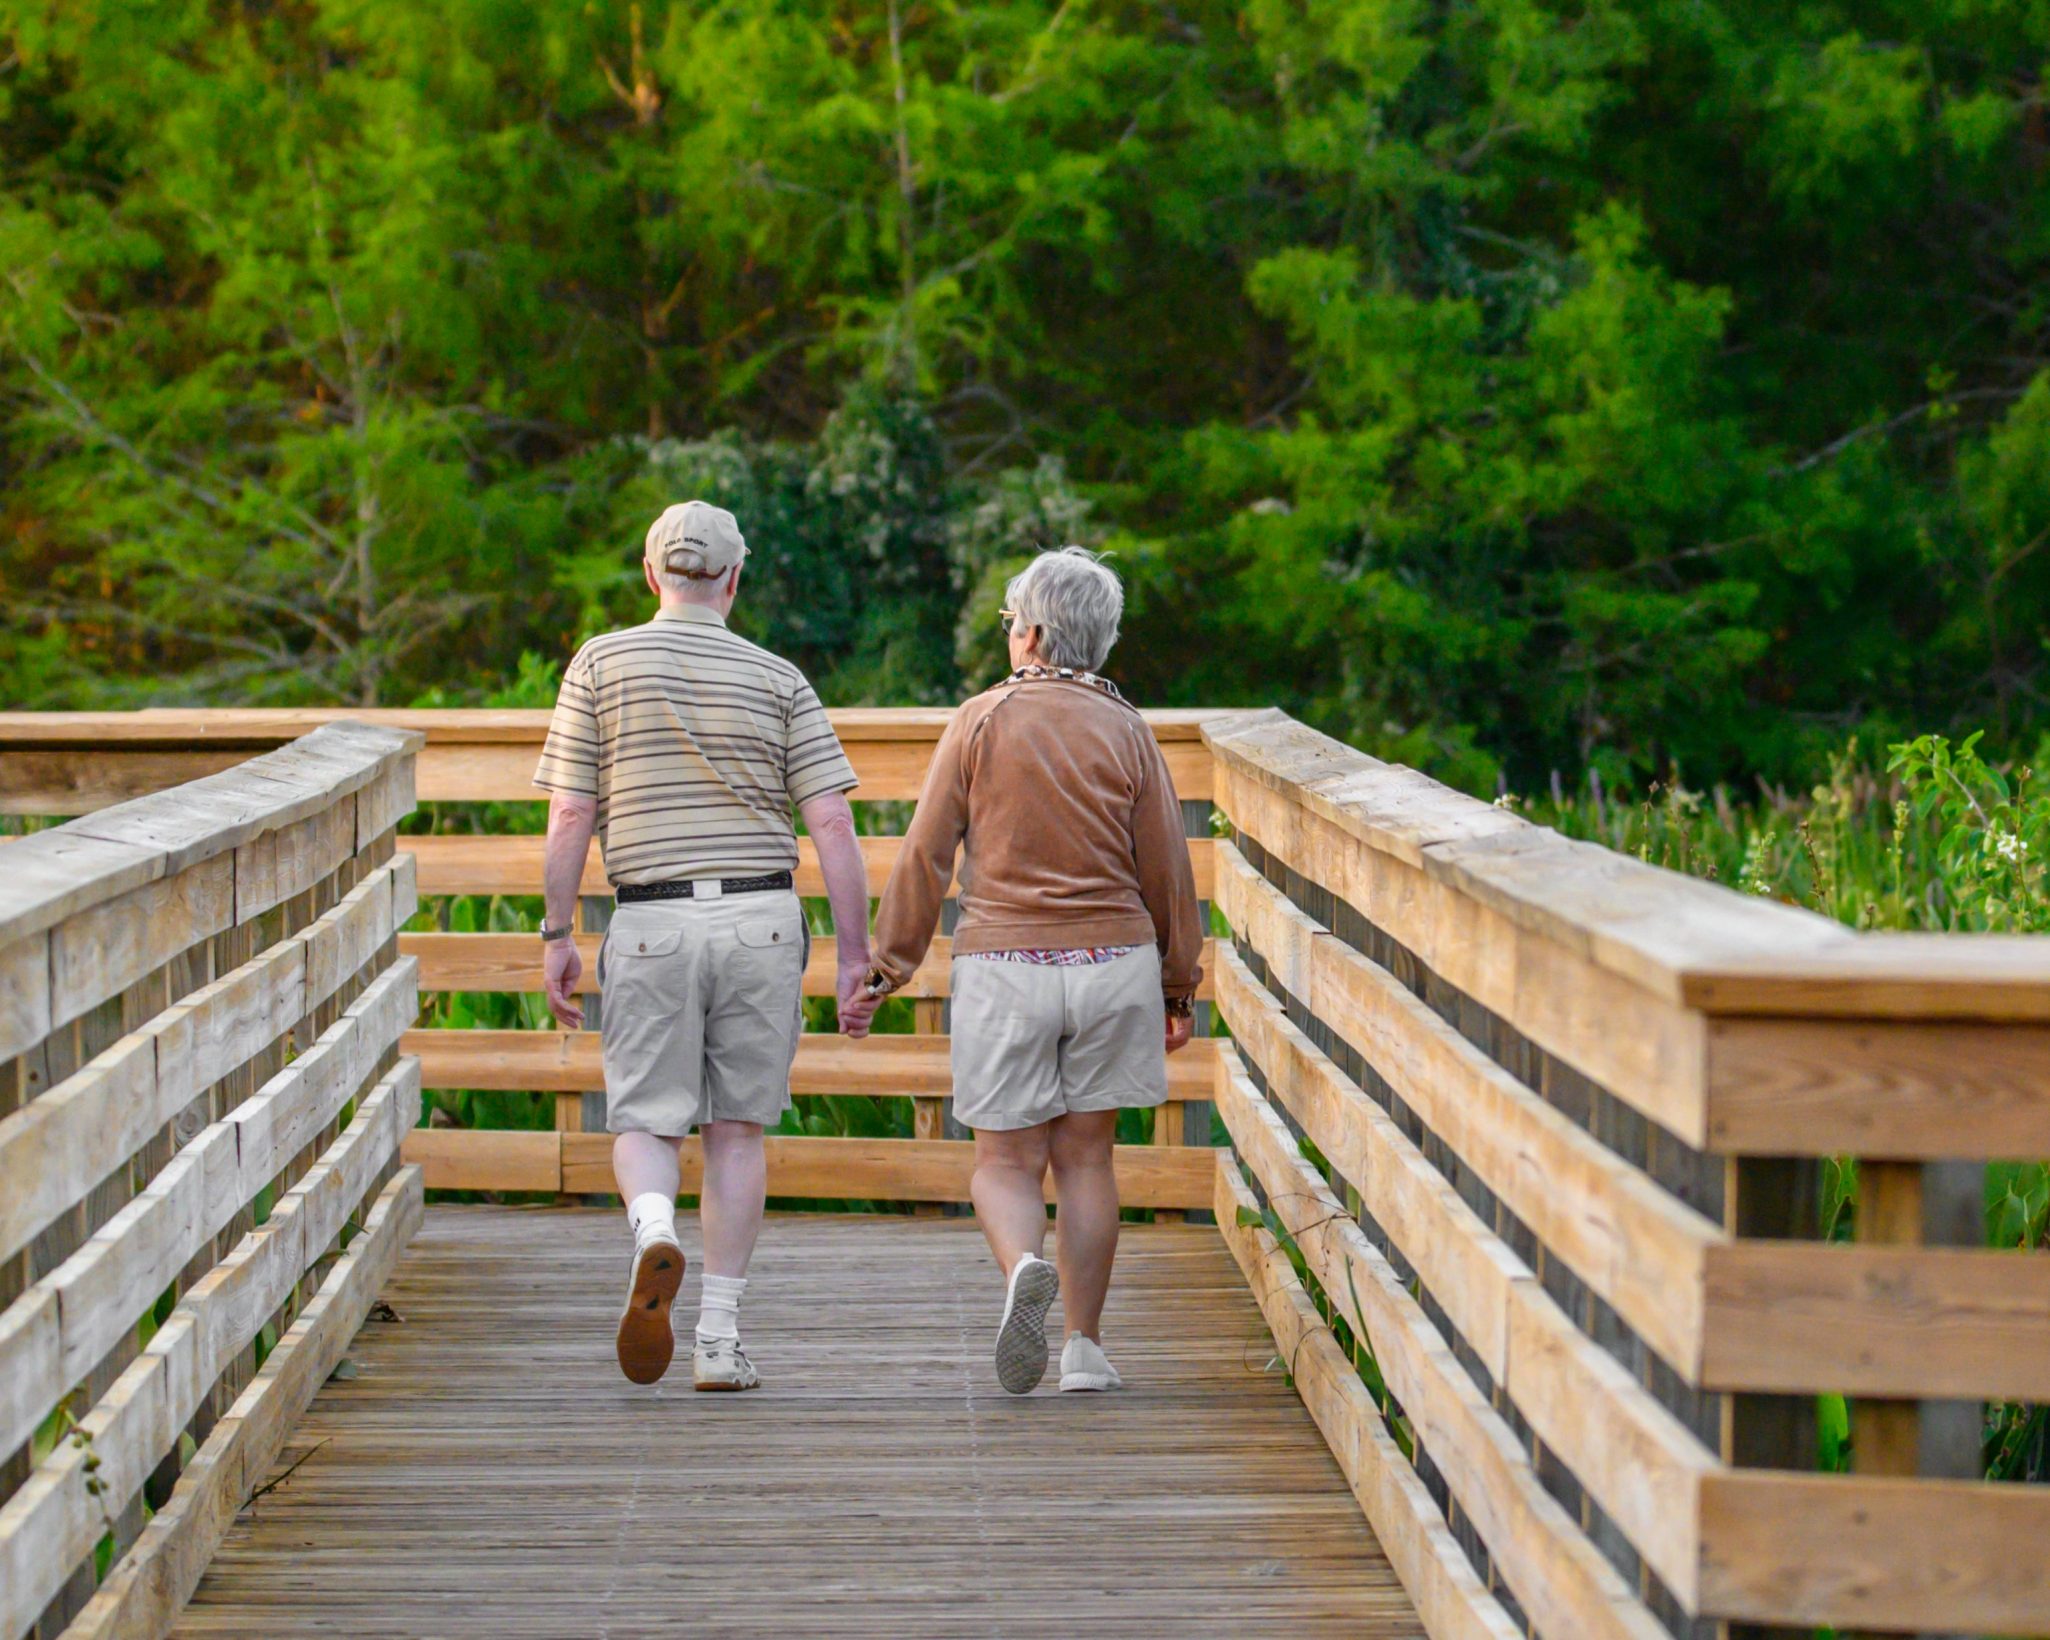 senior health and wellness is important as you age. Walking is excellent for overall health